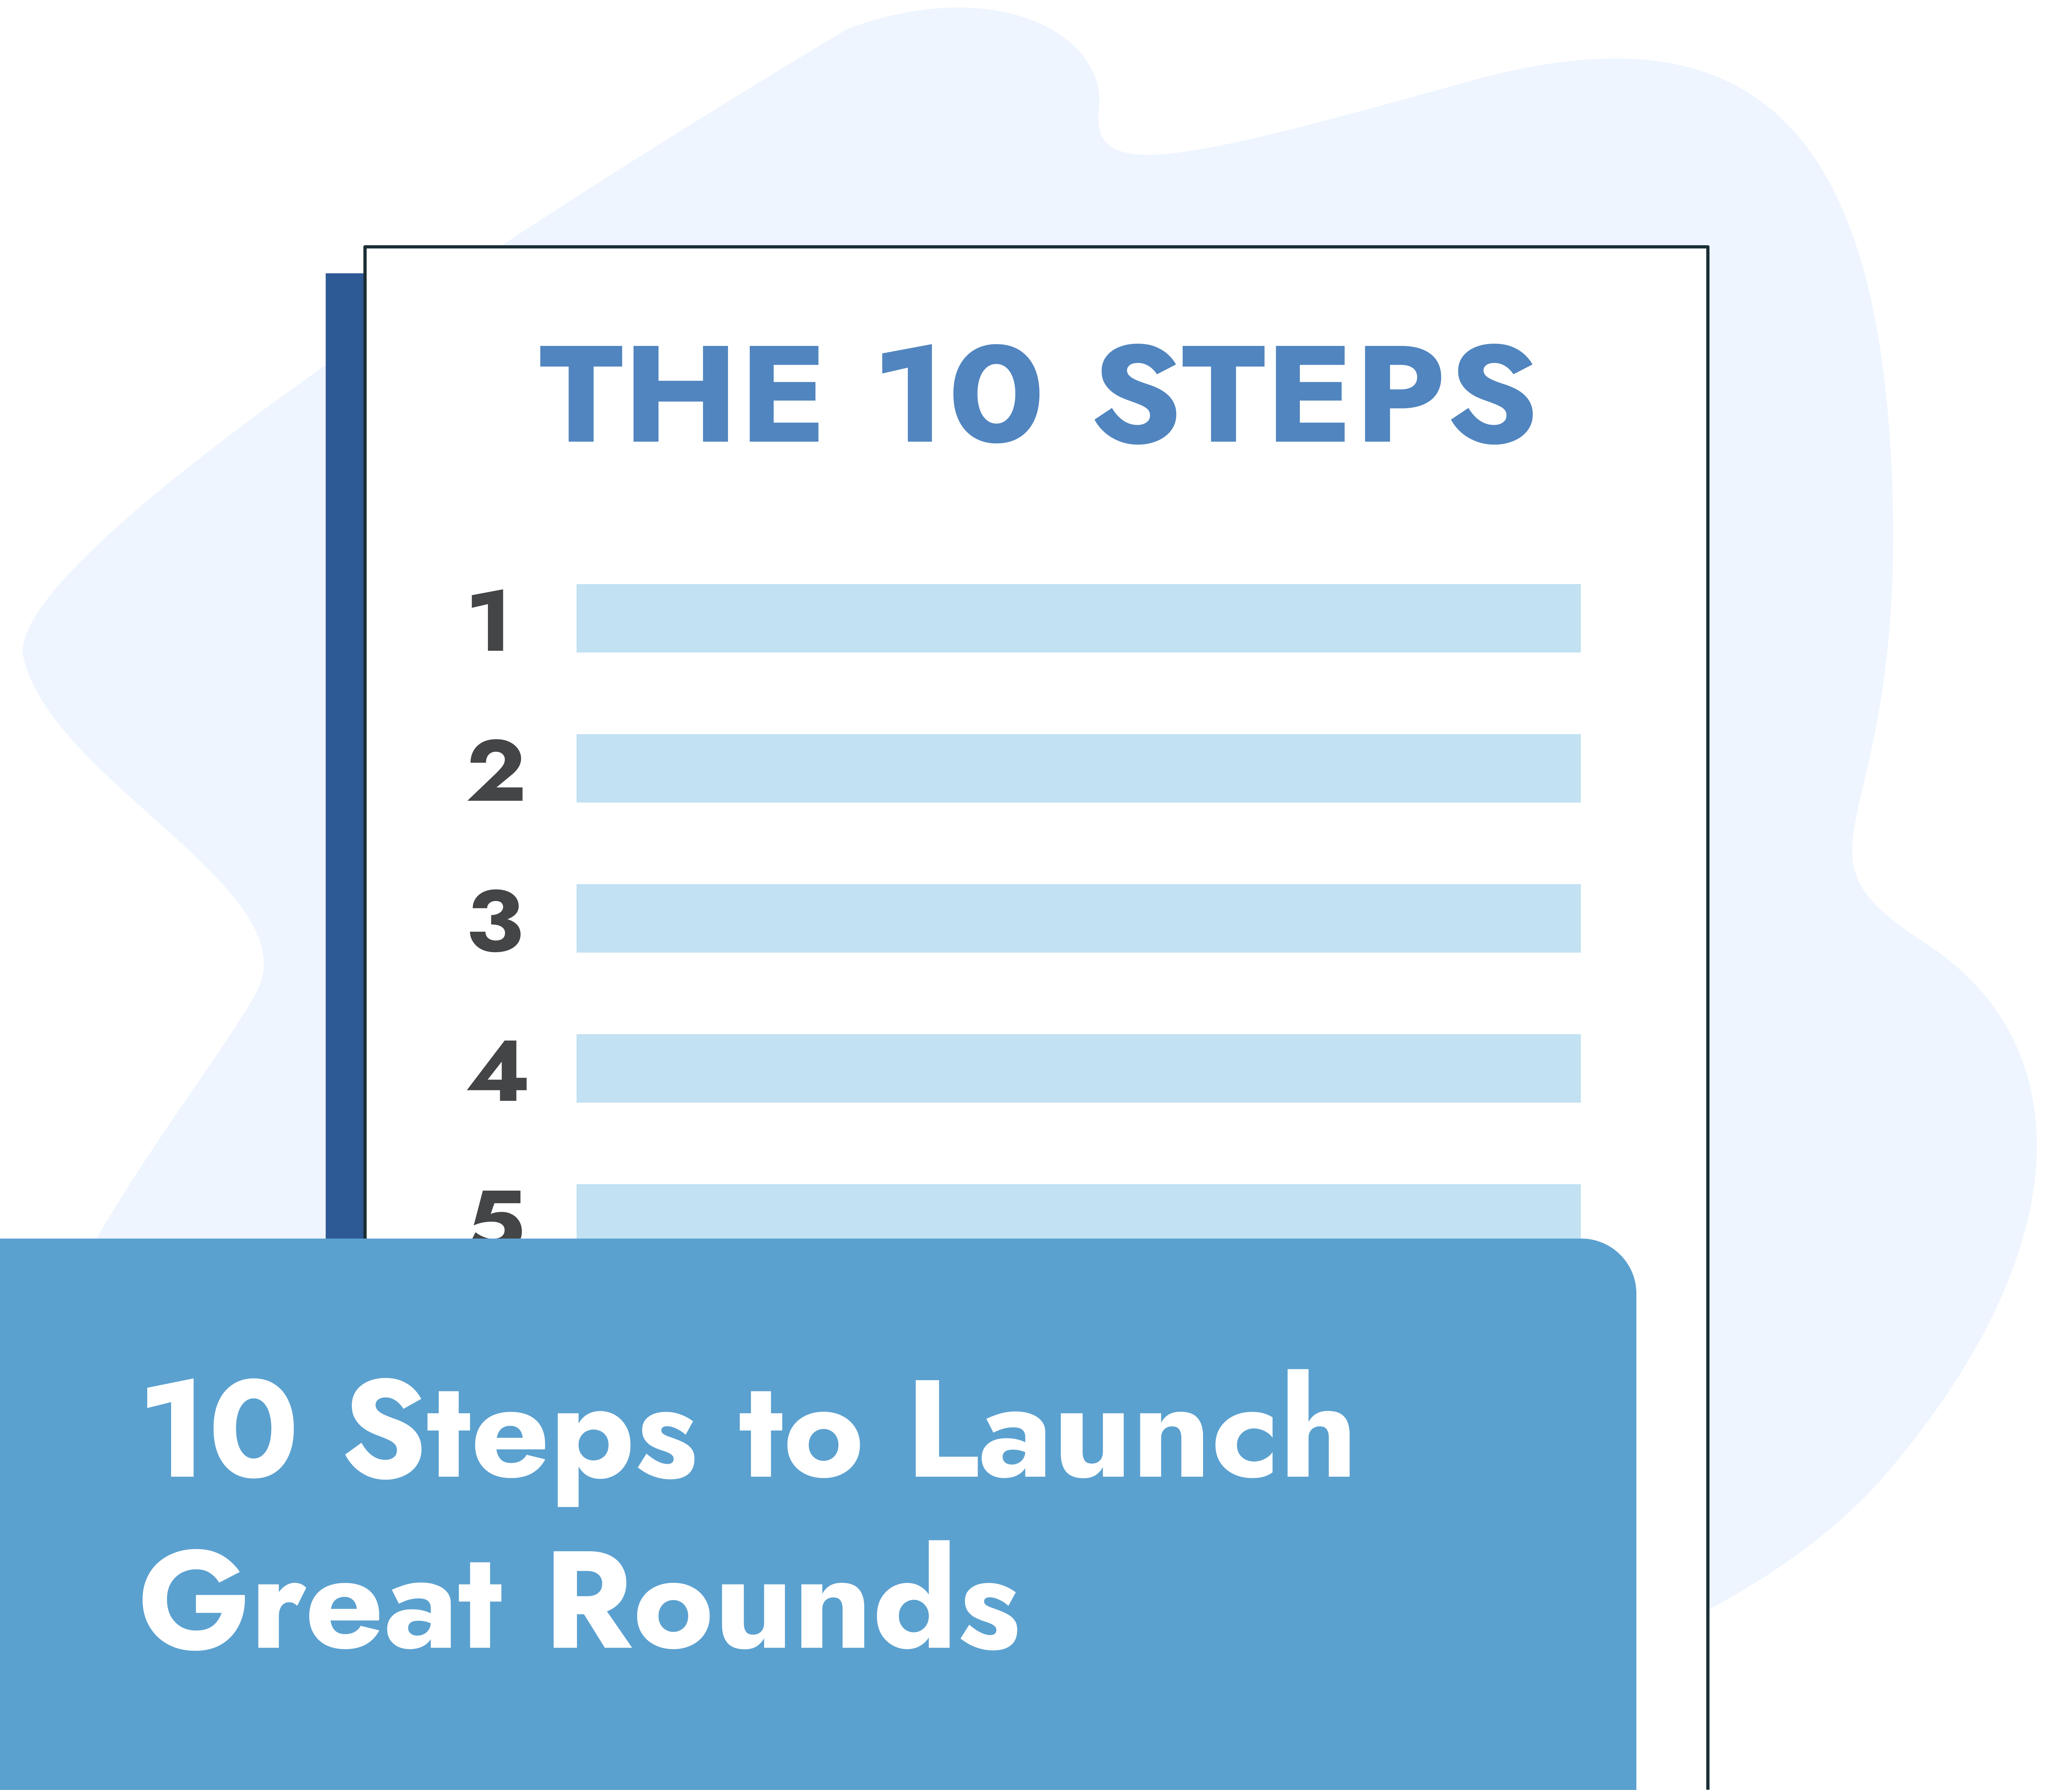 The 10 steps to launch great interdisciplinary rounds